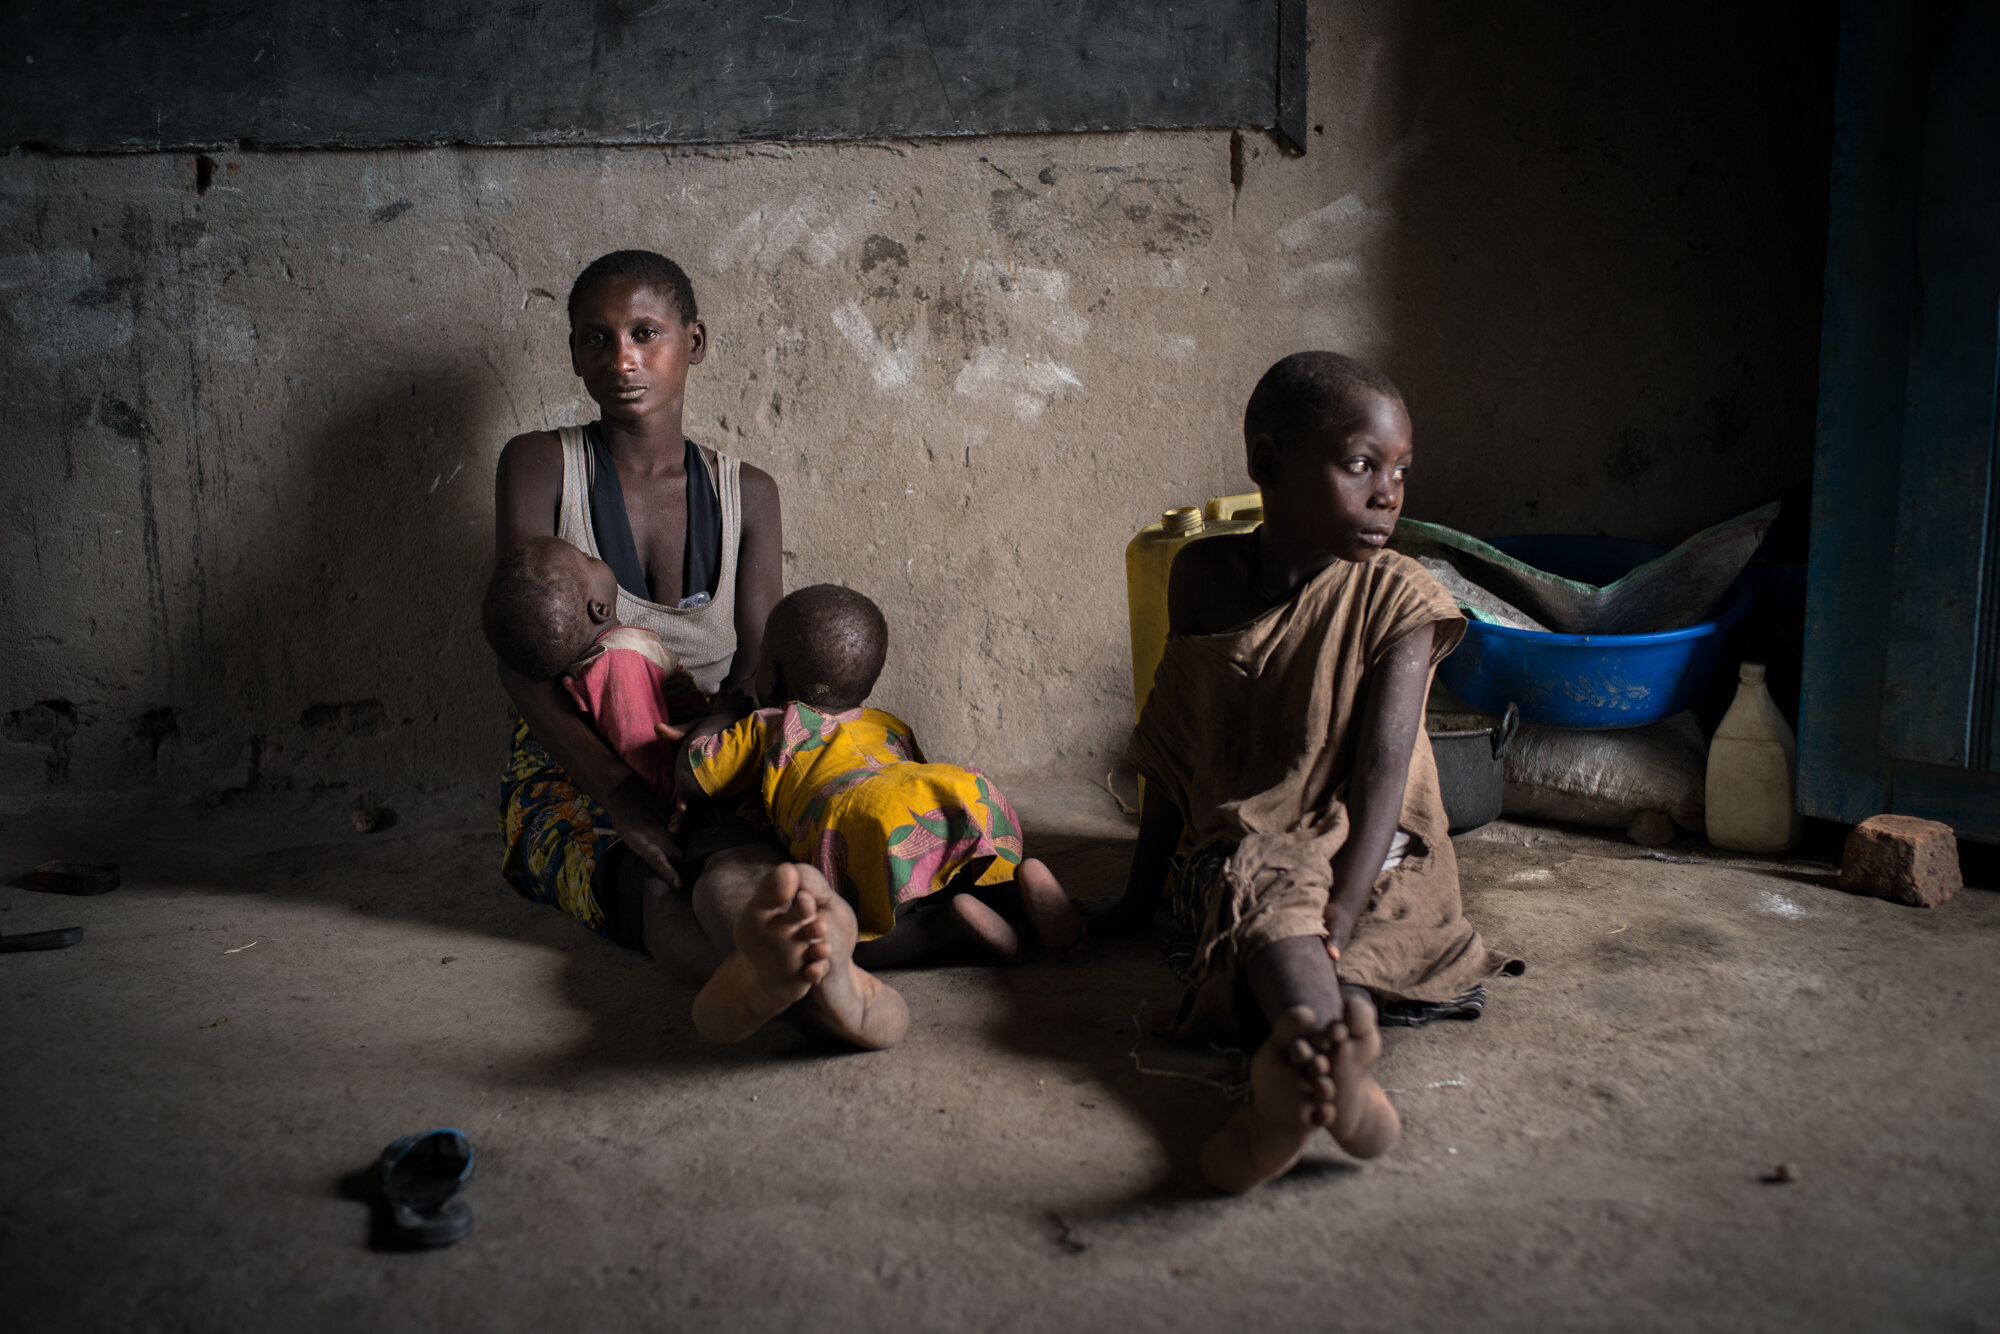  Francois Love, 30, and her children seek shelter in a school in Kasenyi, a town on the coast of Lake Albert. Kafe - mother of 5 - left 5 days ago. People here have fled their villages after militias arrived, burning houses and attacking people with 